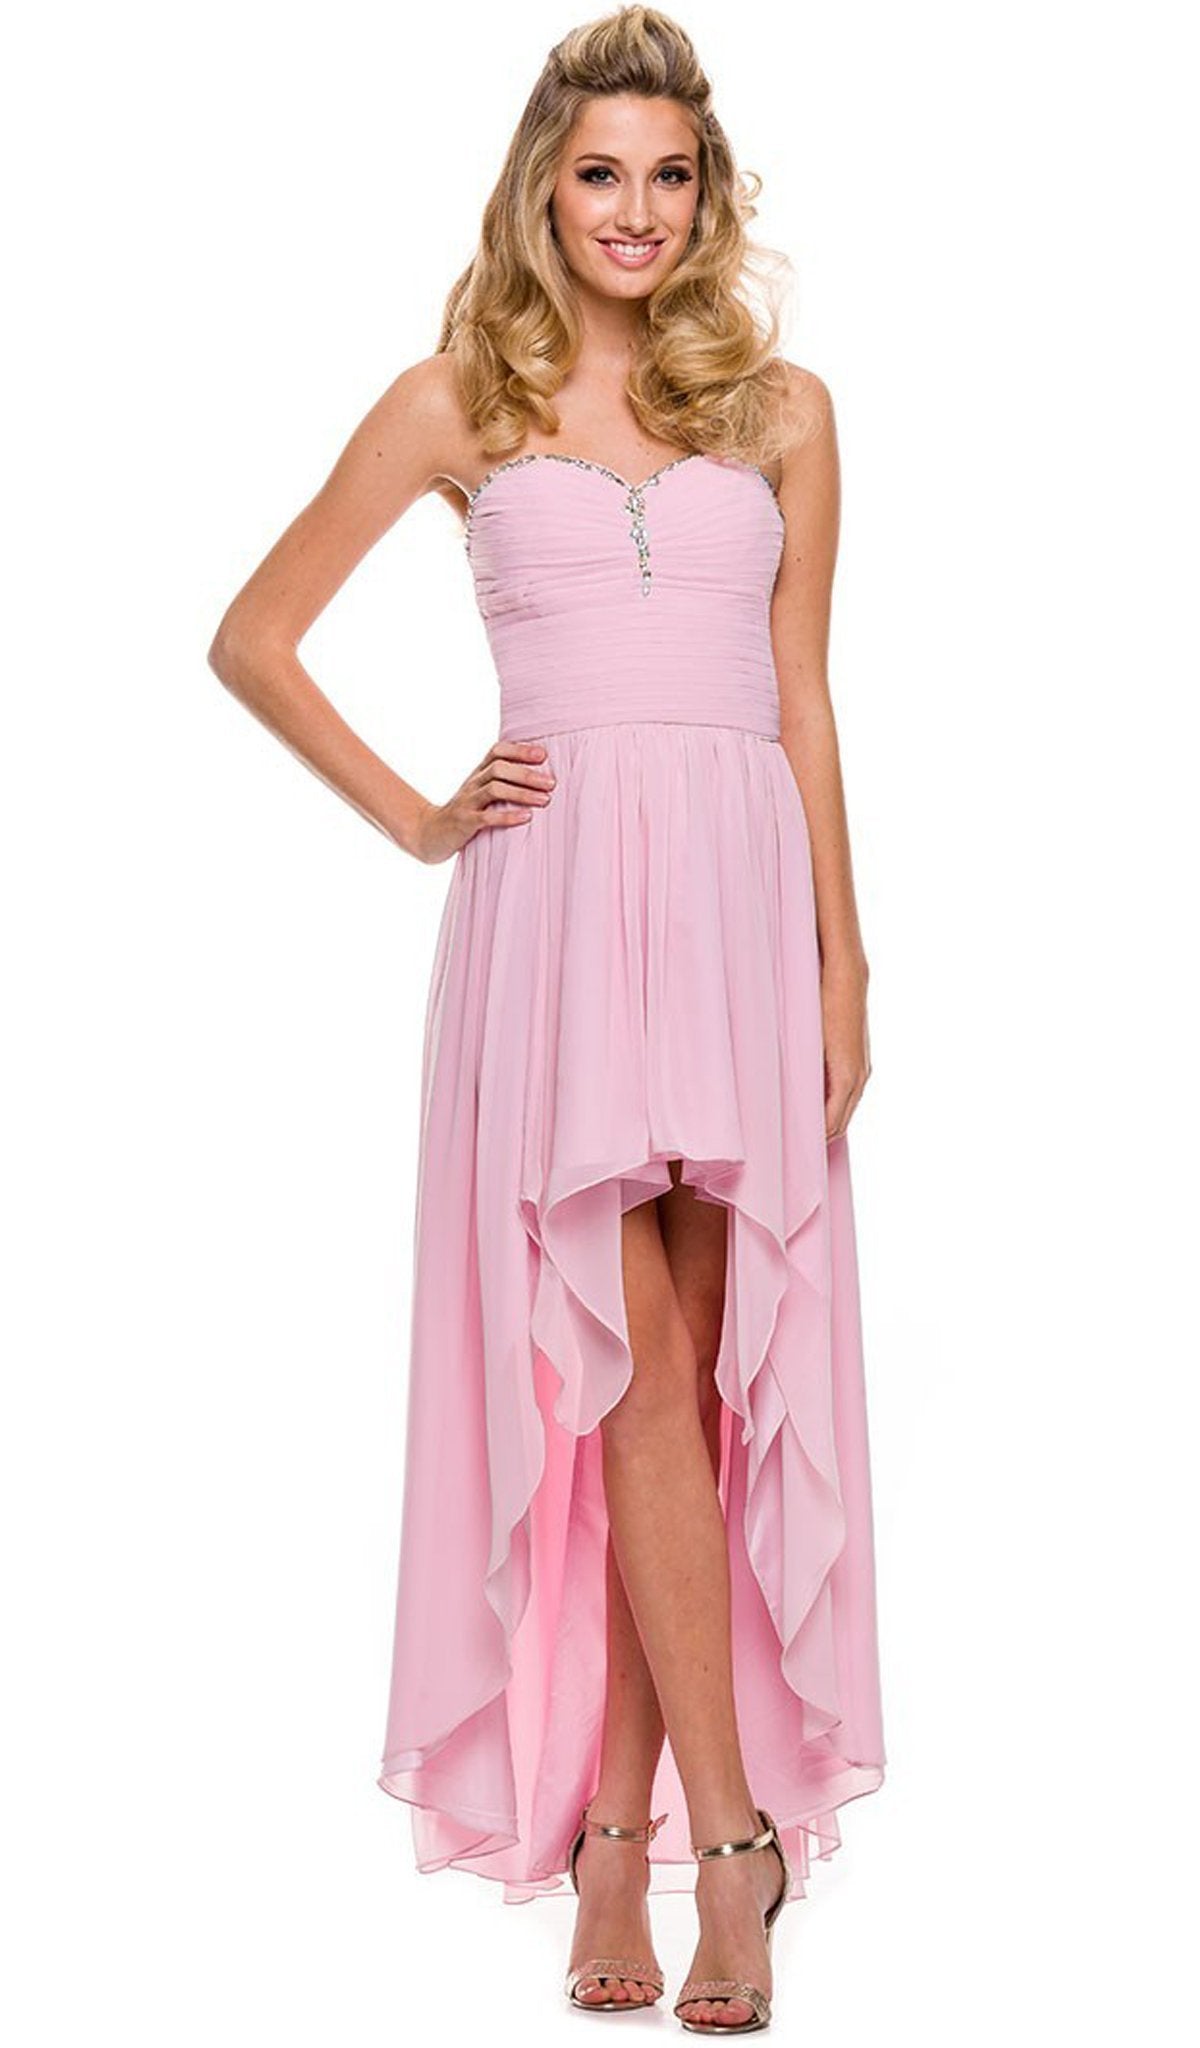 Nox Anabel - 2699 Strapless Ruched High Low Dress Special Occasion Dress XS / Baby Pink